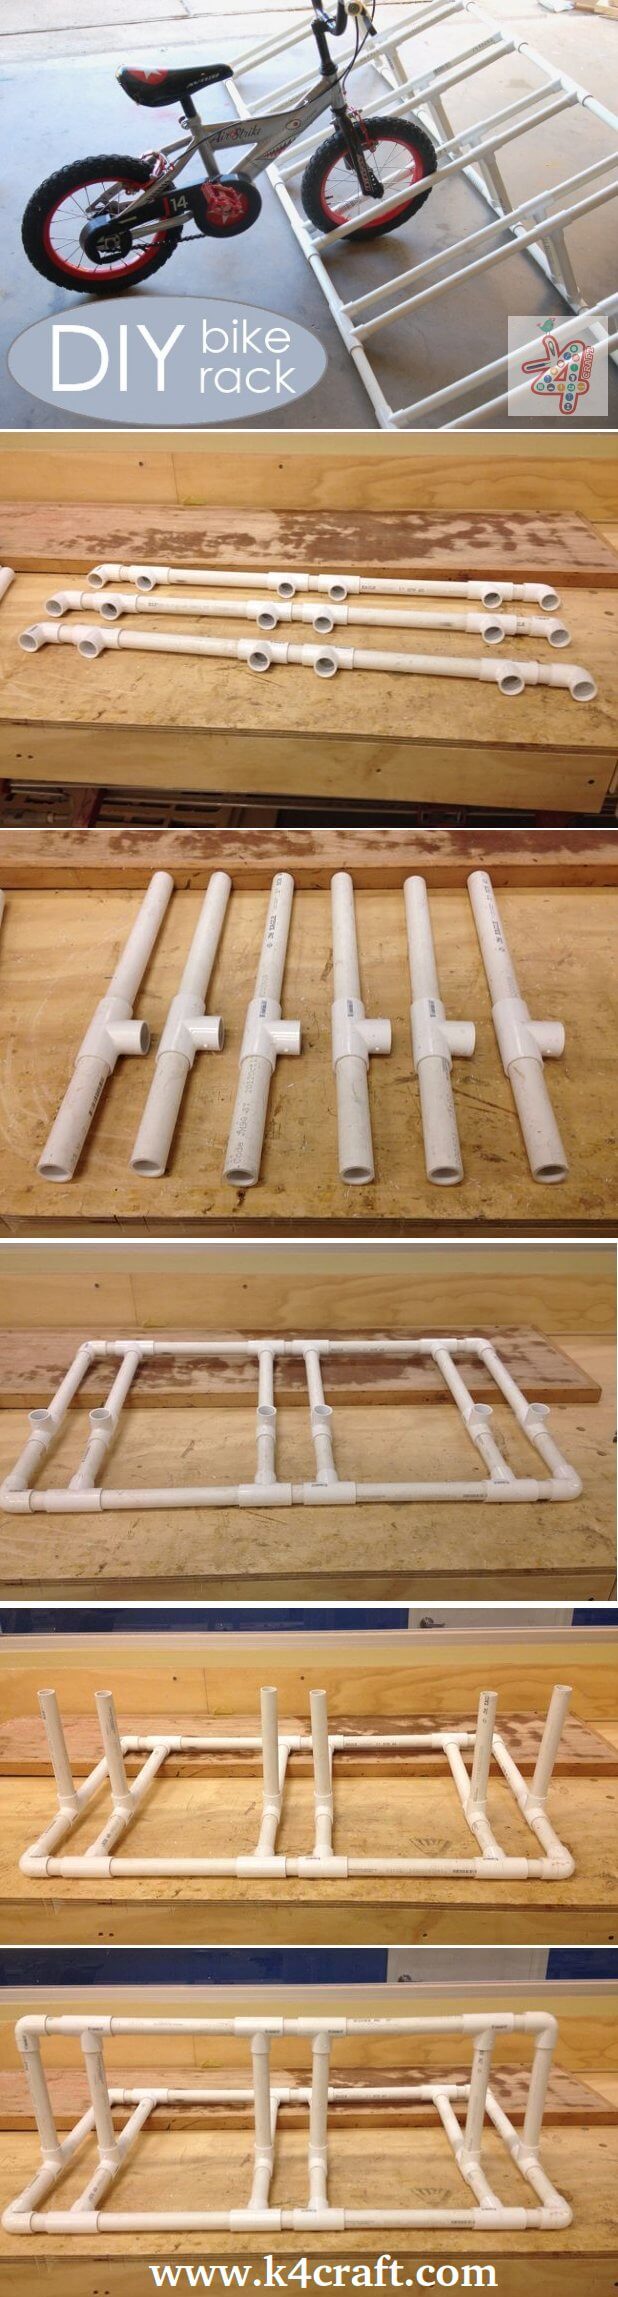 diy-bike-rack-pvc-pipe-project DIY Creative Uses Of PVC Pipes - Step by step